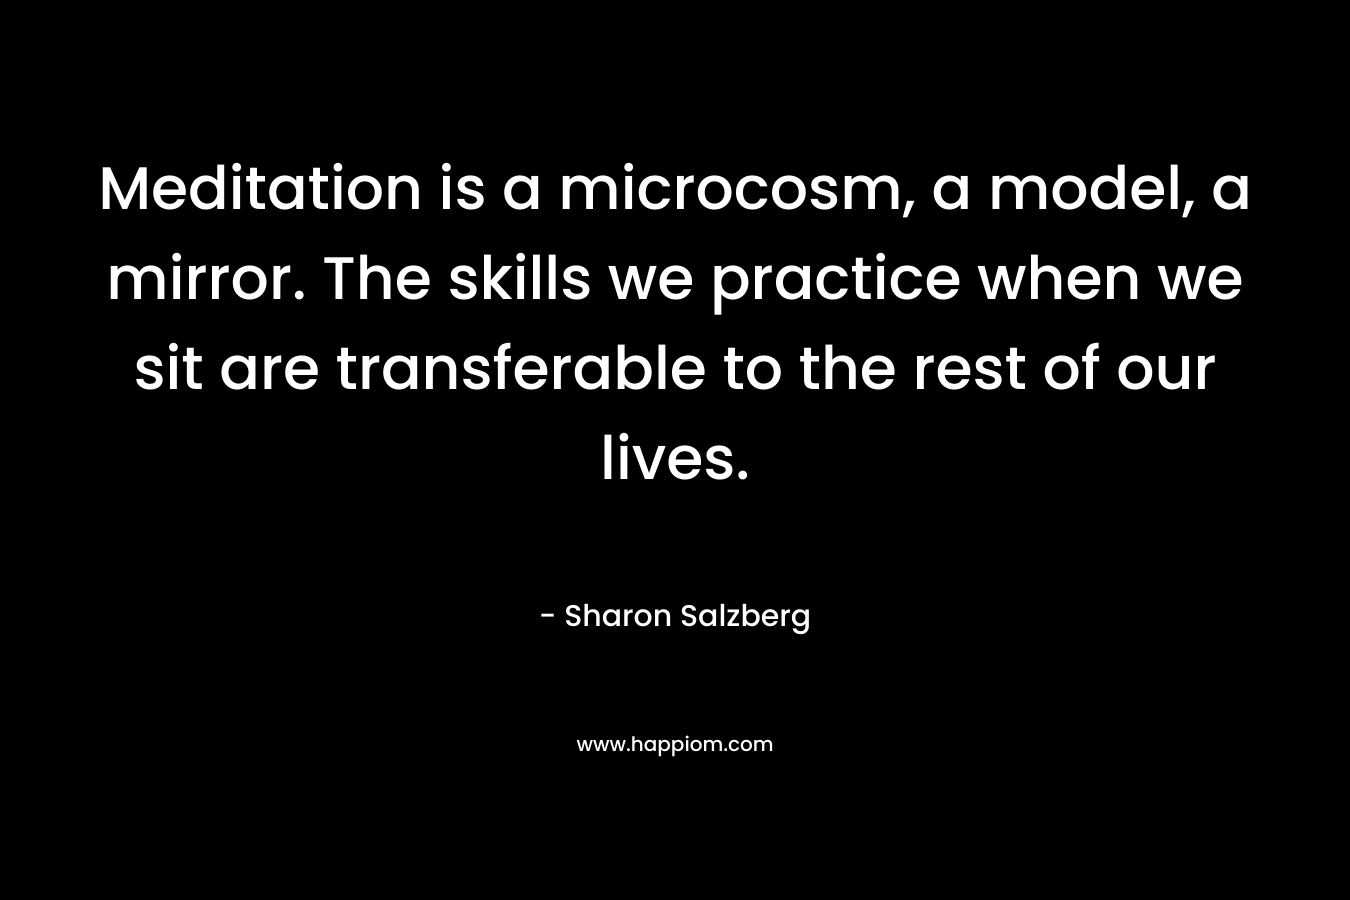 Meditation is a microcosm, a model, a mirror. The skills we practice when we sit are transferable to the rest of our lives.